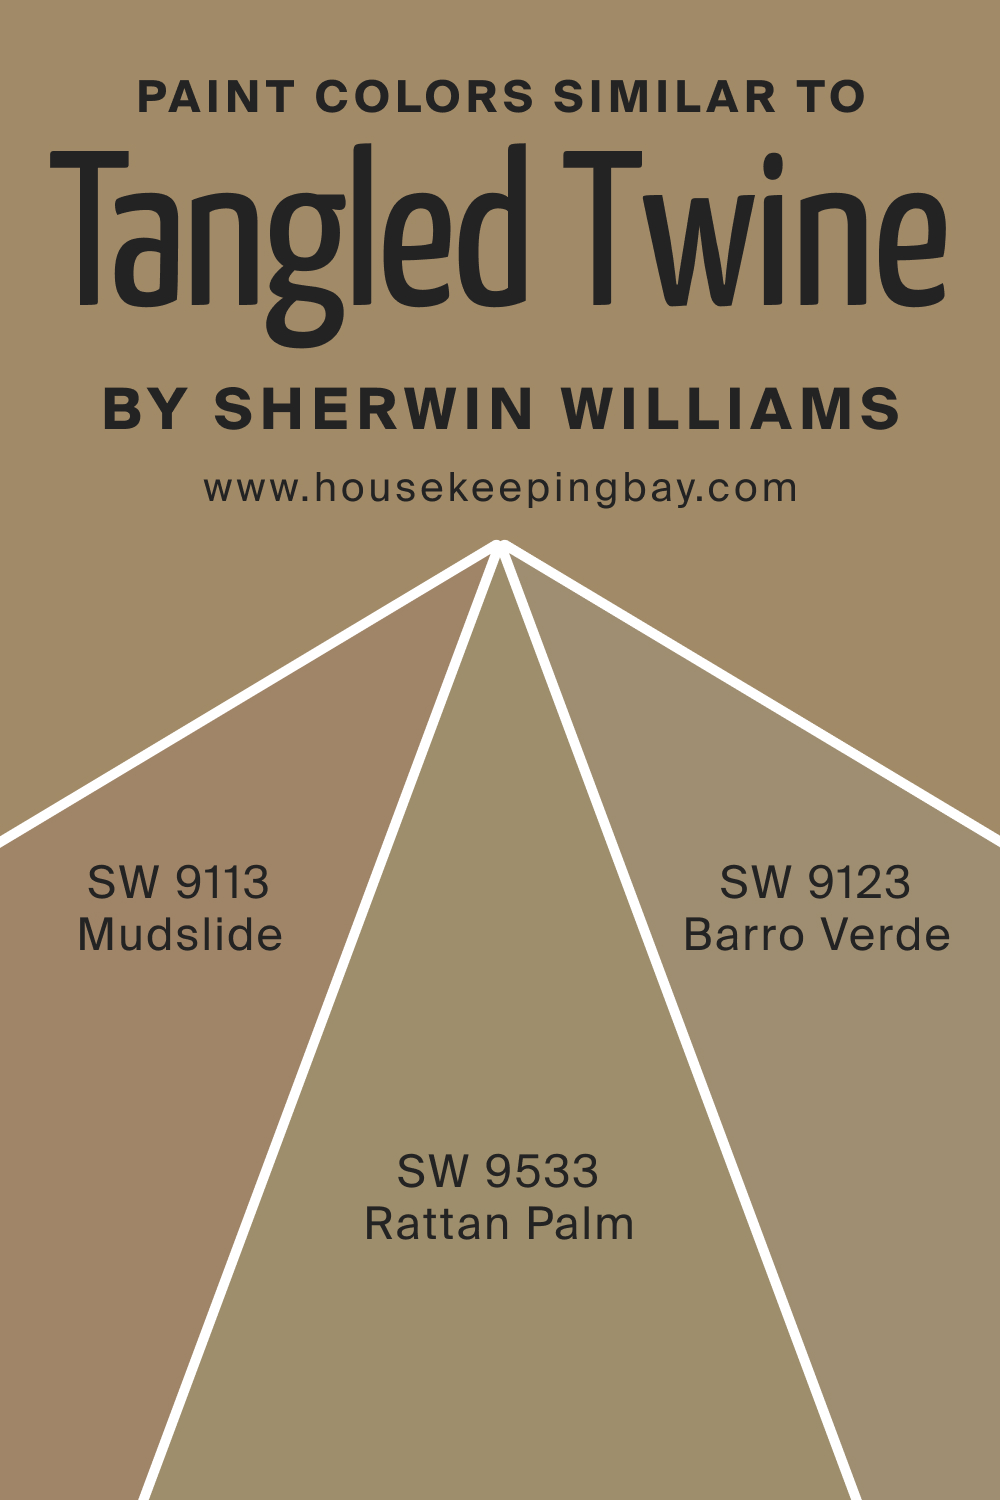 Paint Color Similar to SW 9538 Tangled Twine by Sherwin Williams